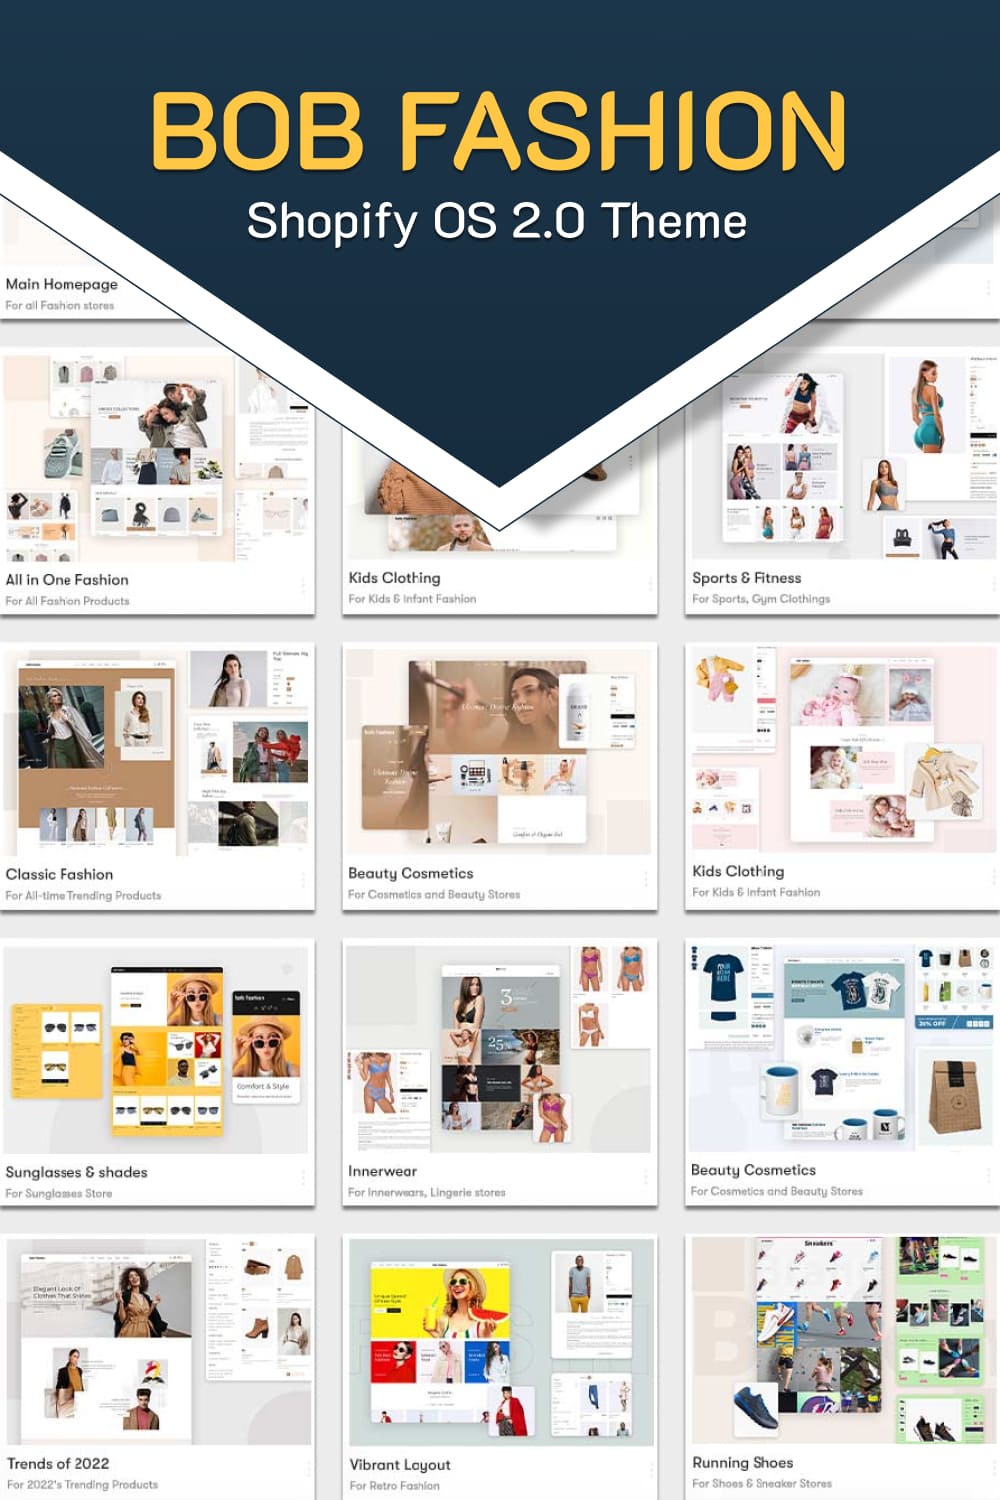 Product and shop pages of Bob Fashion.